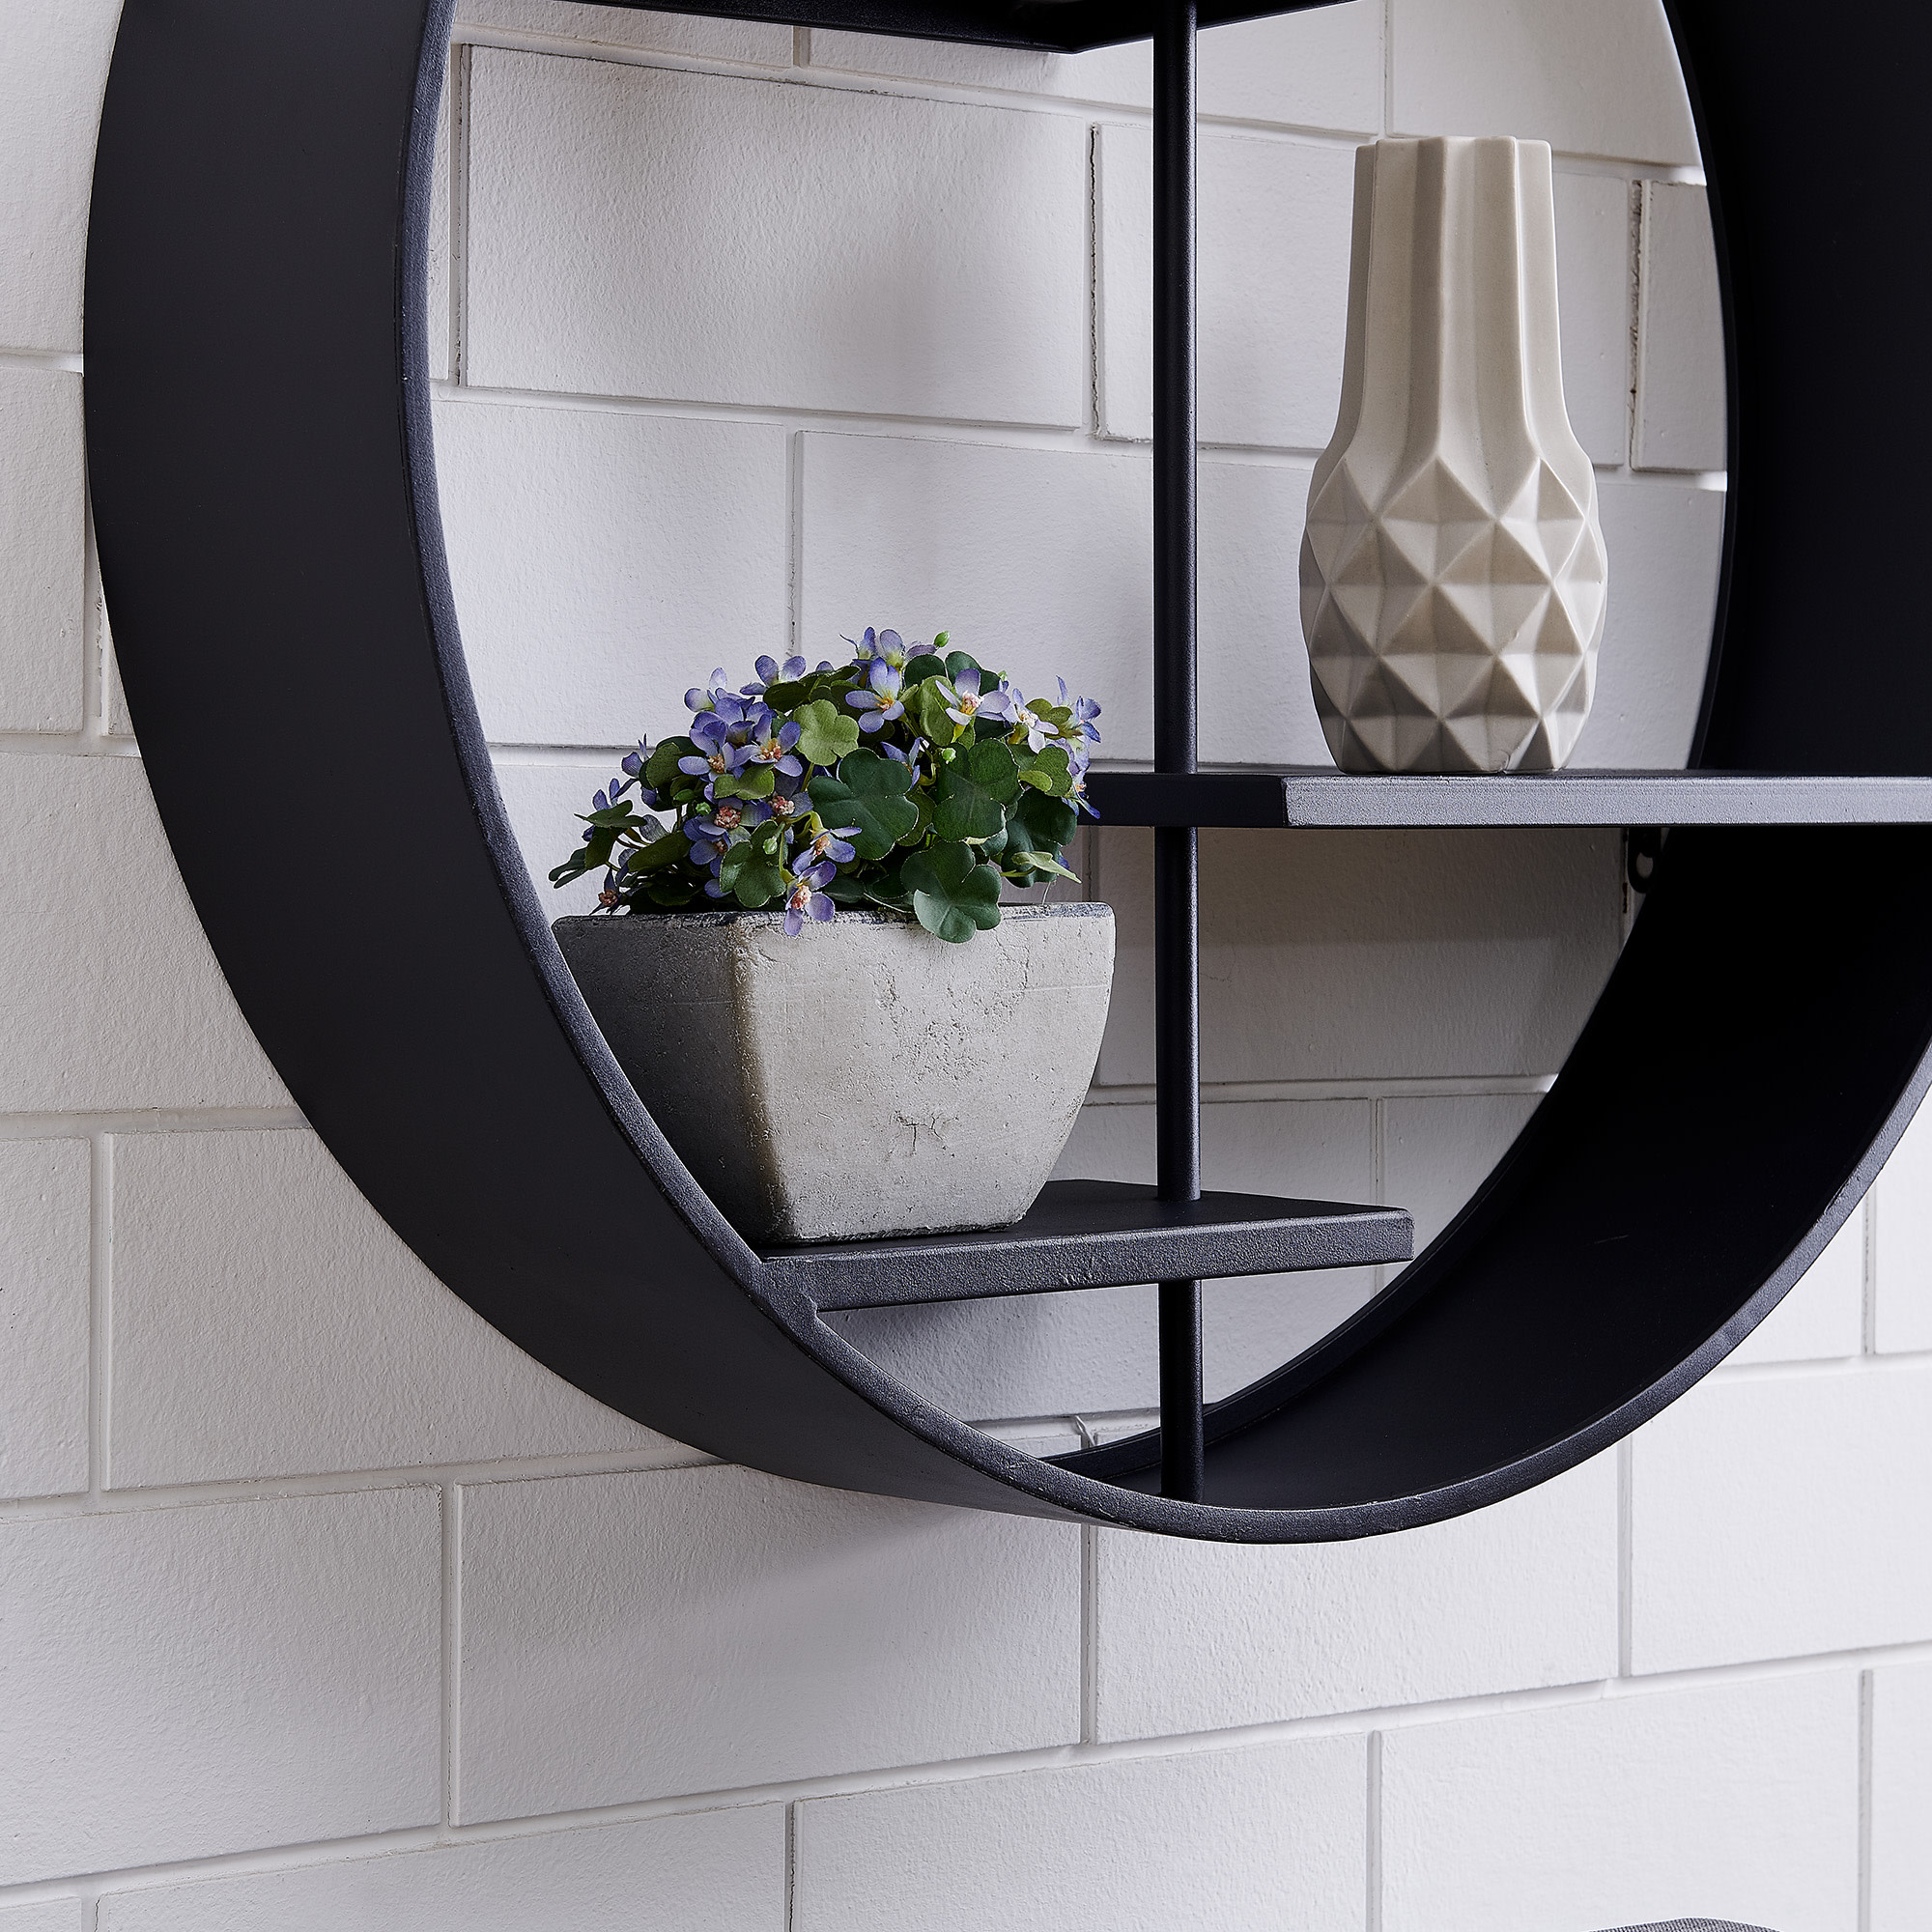 FirsTime & Co.® Brock Industrial Circular Shelf, Industrial, Painted, Round,Metal, 27 x 6 x 27 in - image 4 of 5